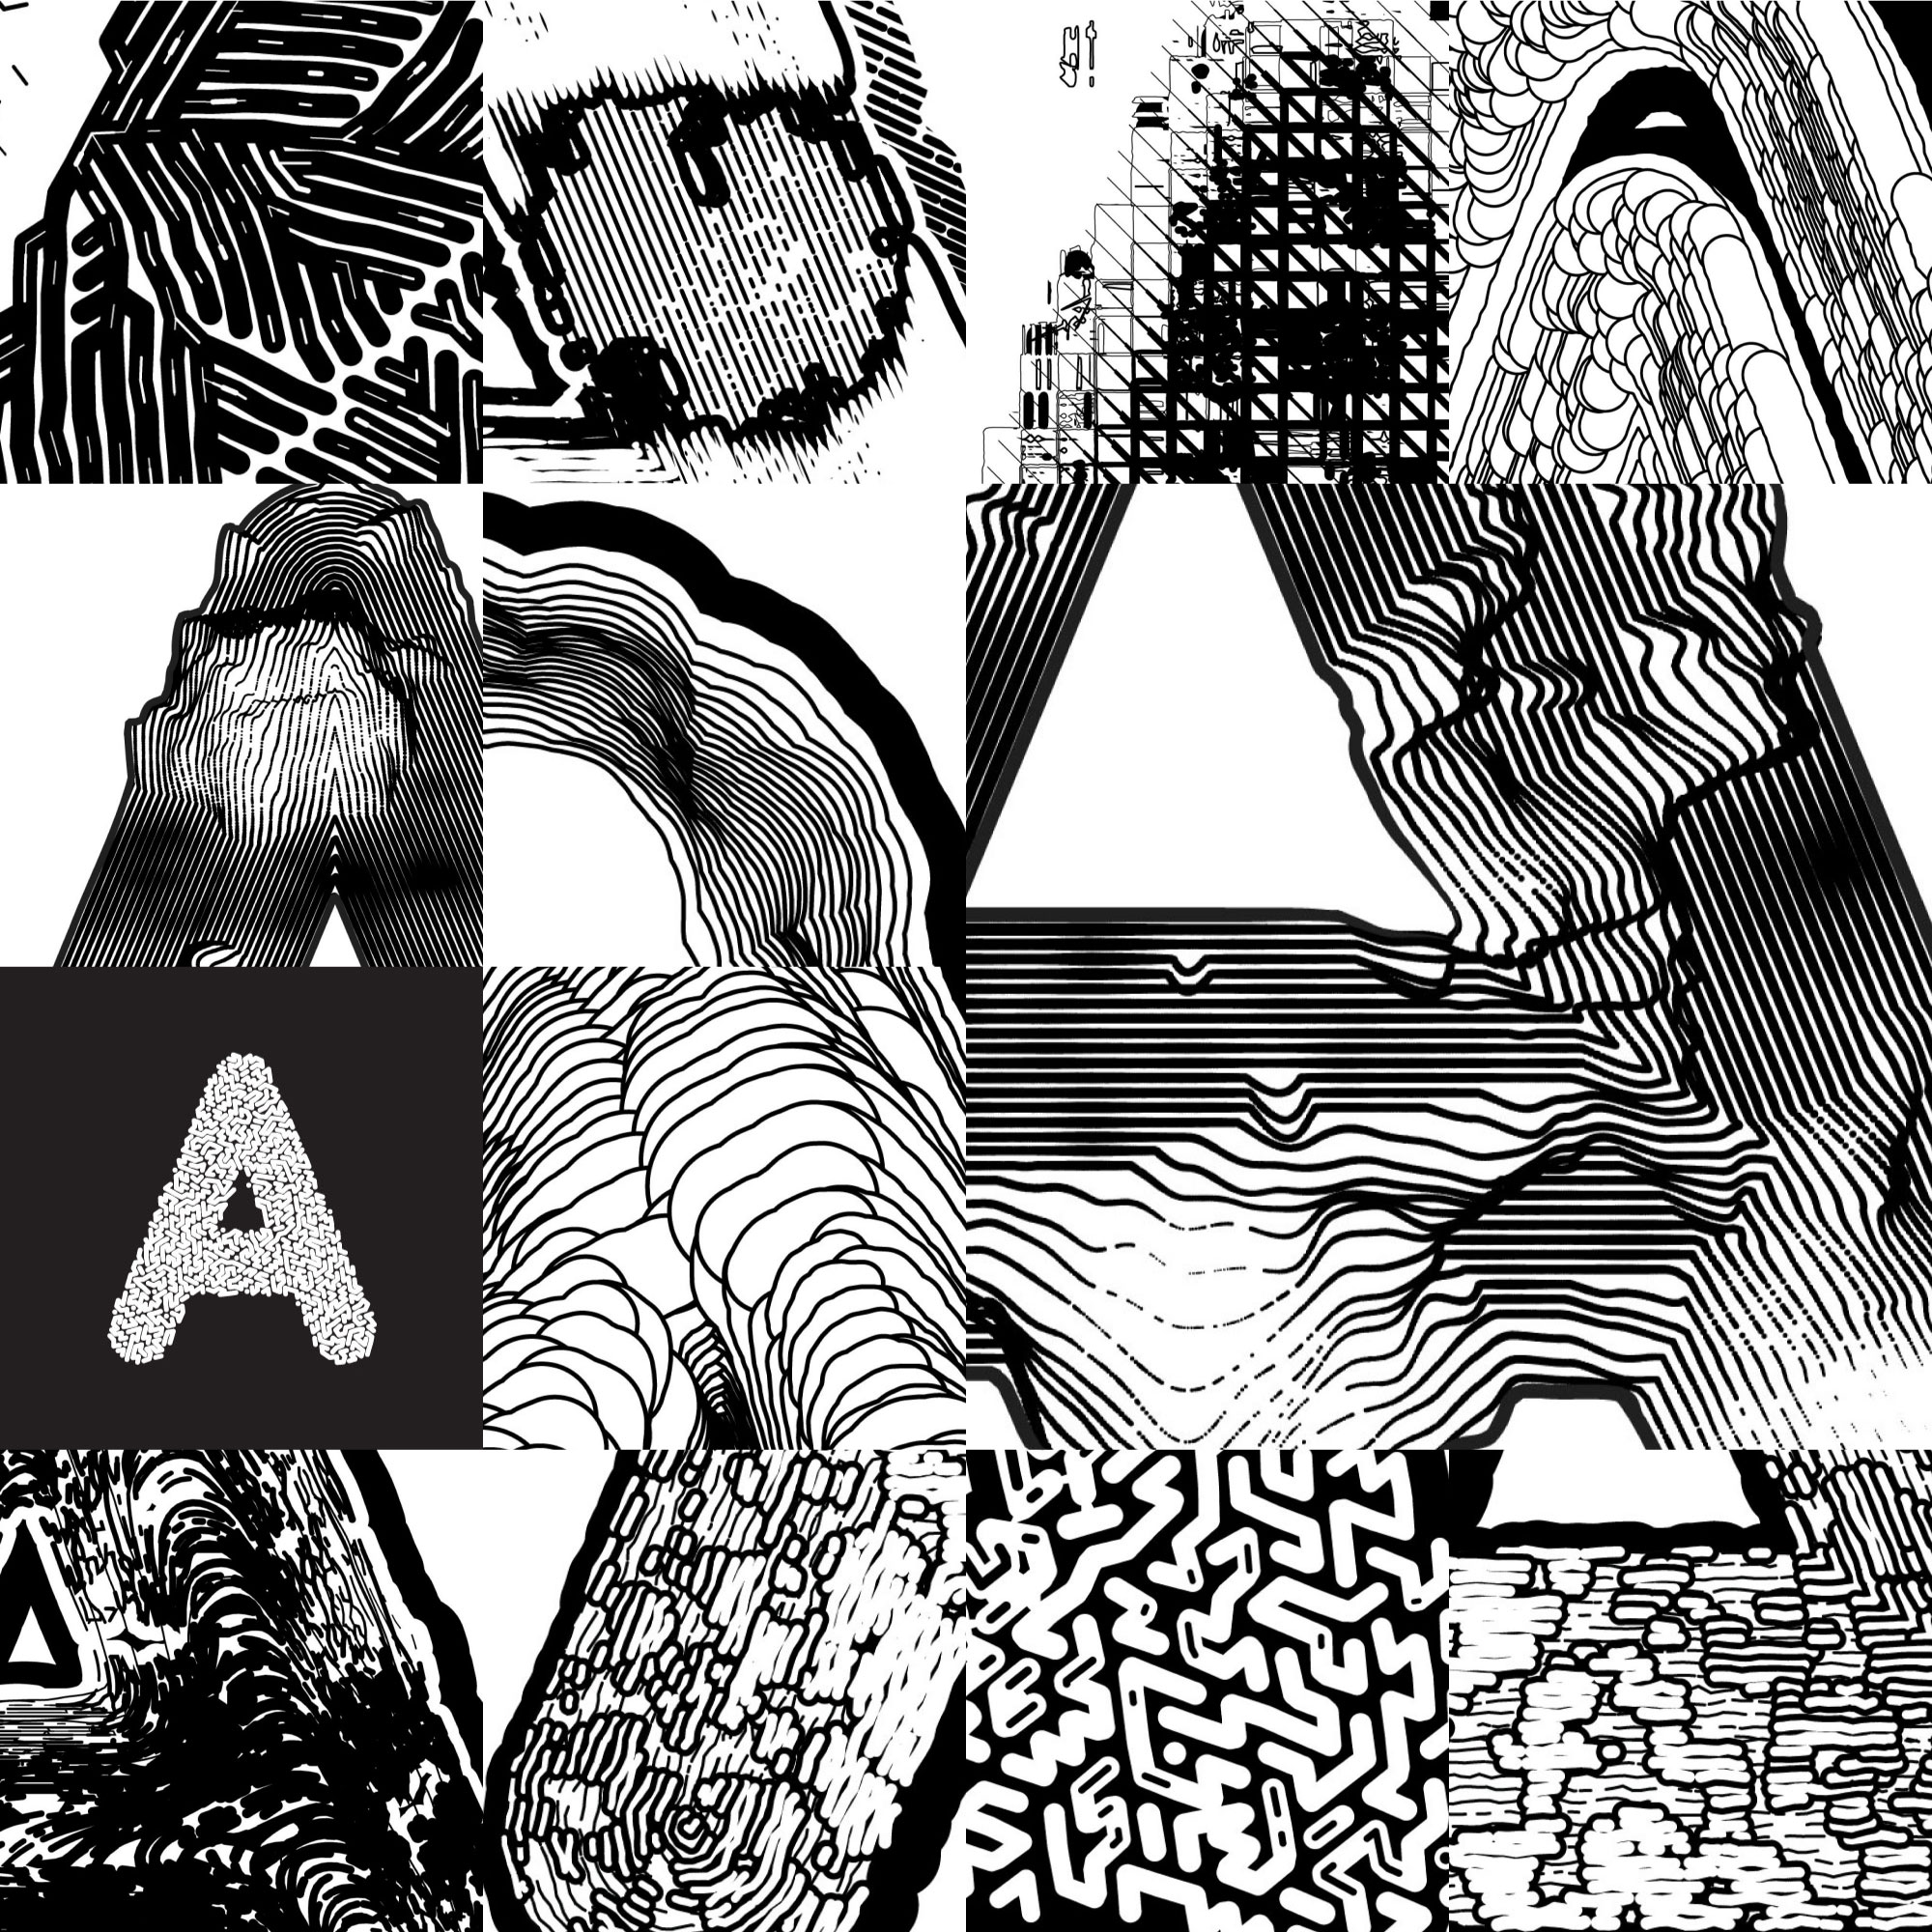 a study, generative typography, creative coding, processing, java, art, typography, poster, graphic design, perlin noise